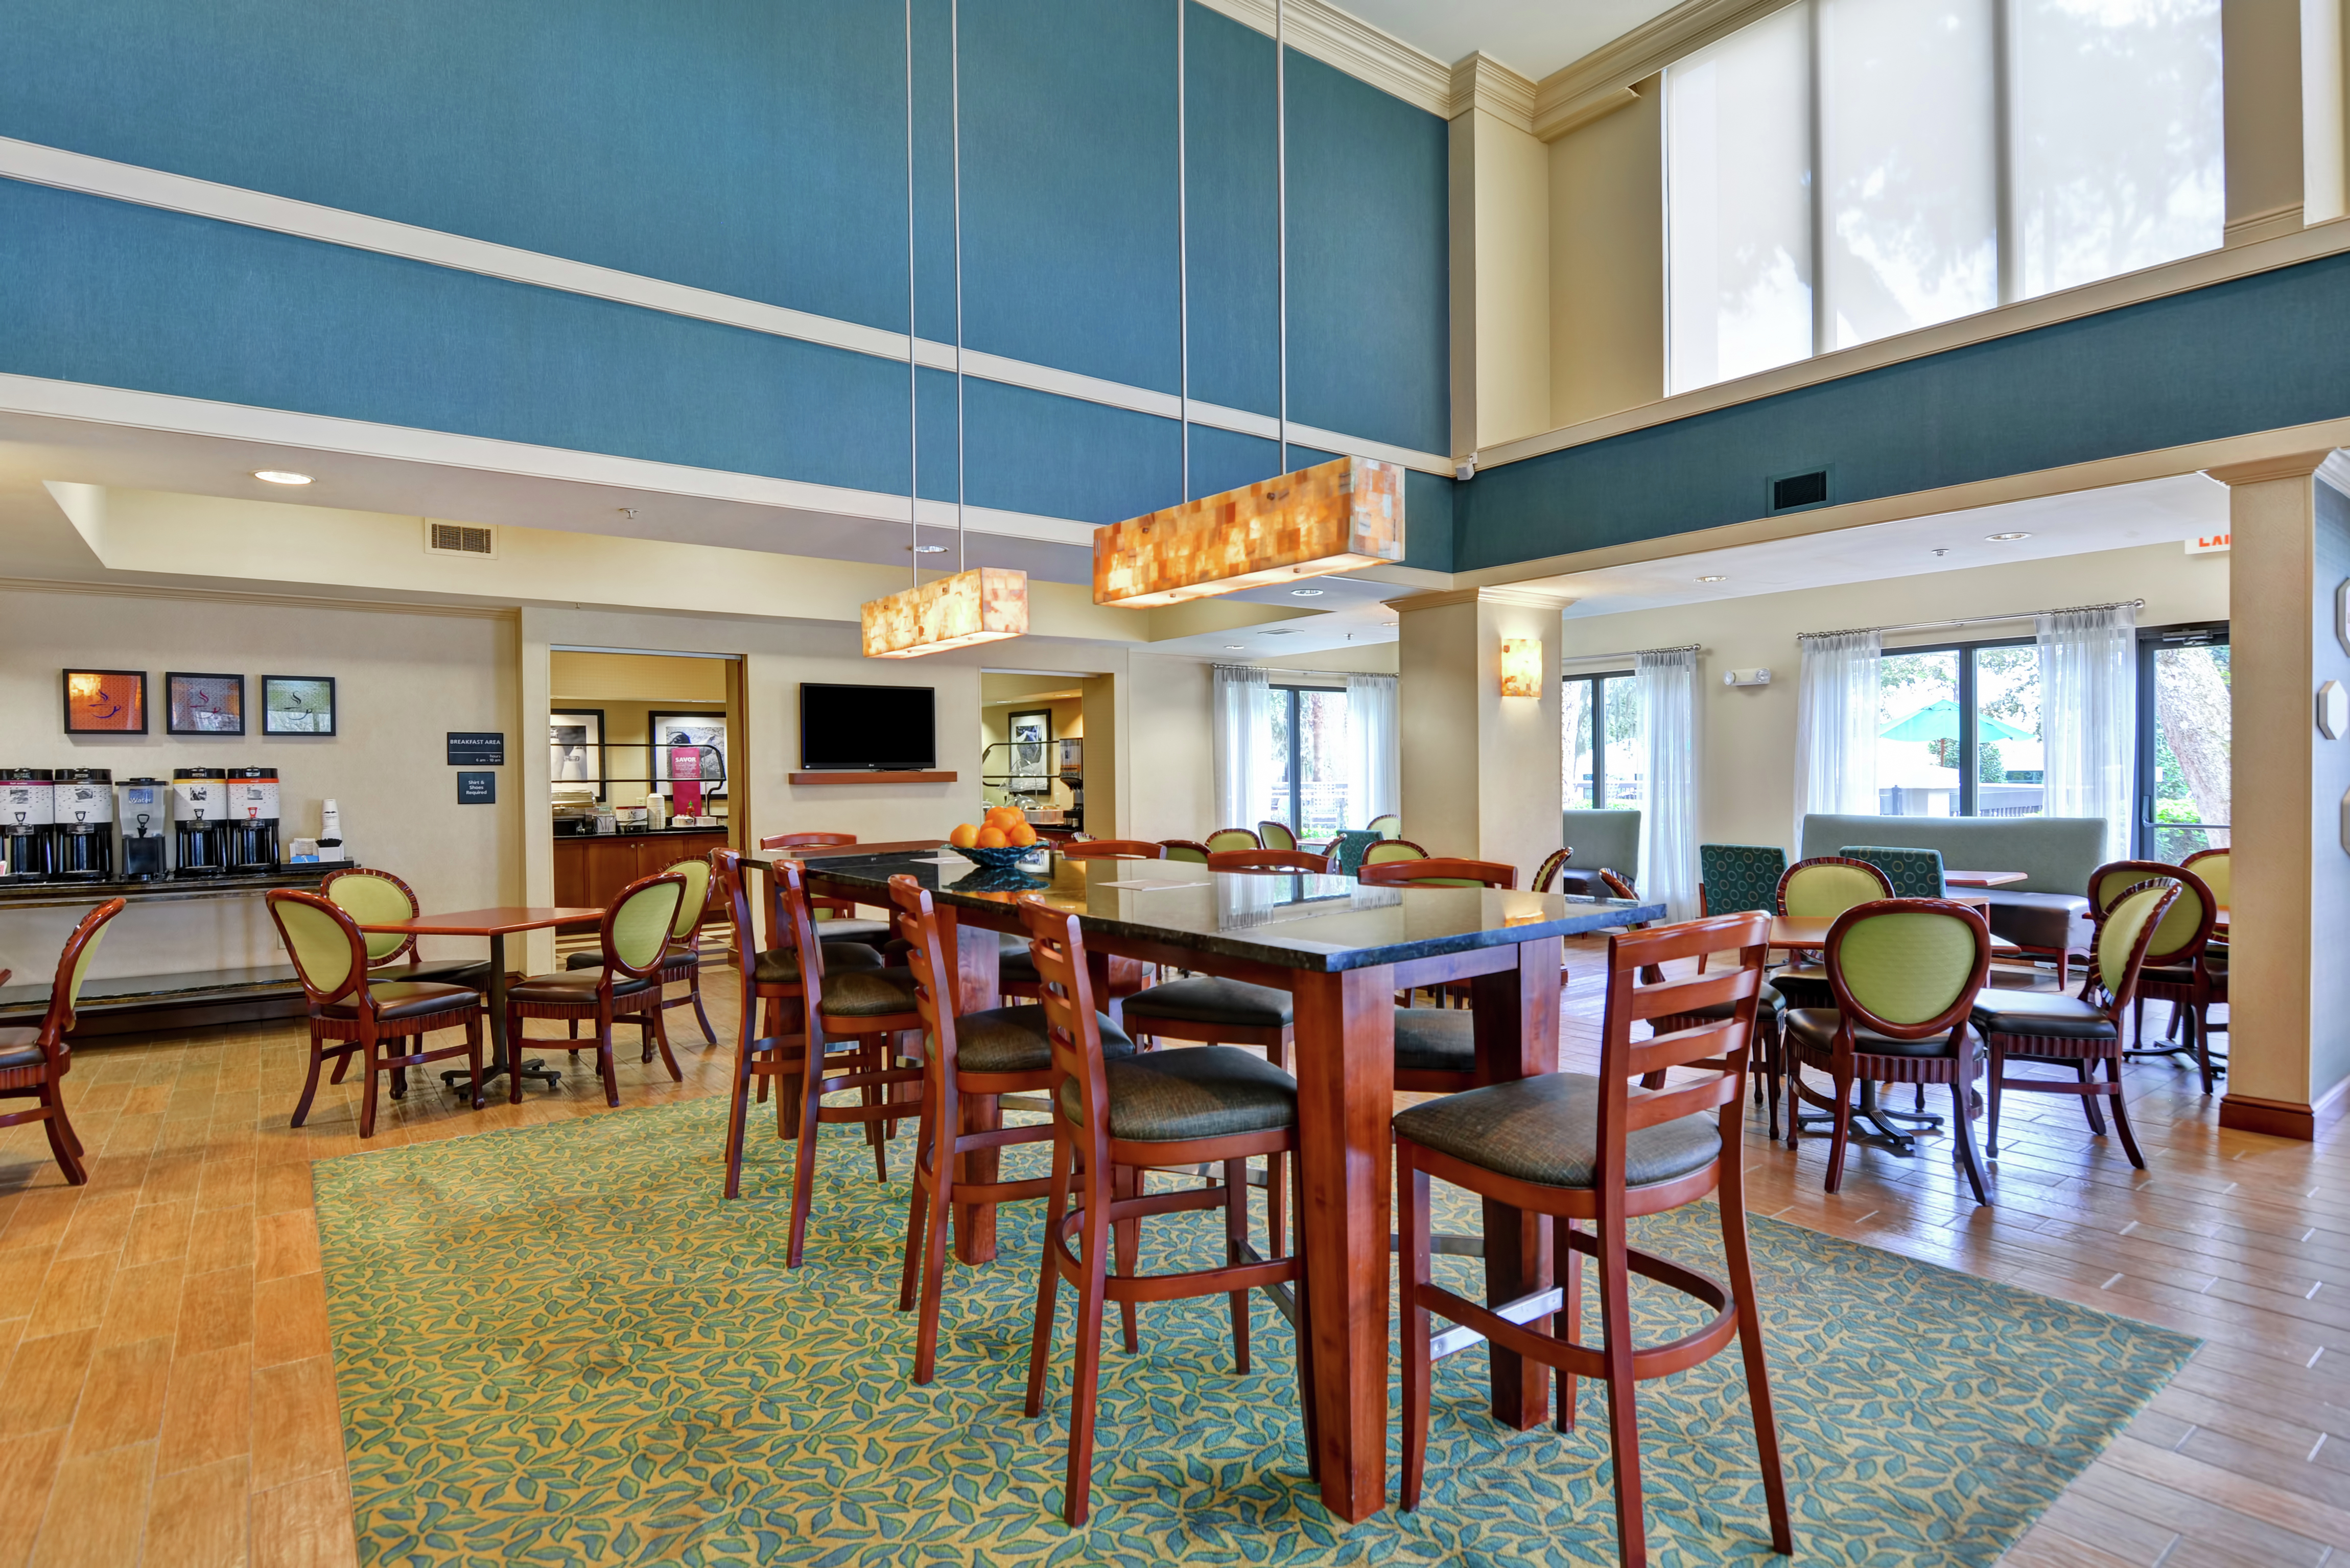 Lobby dining area with large table and TV